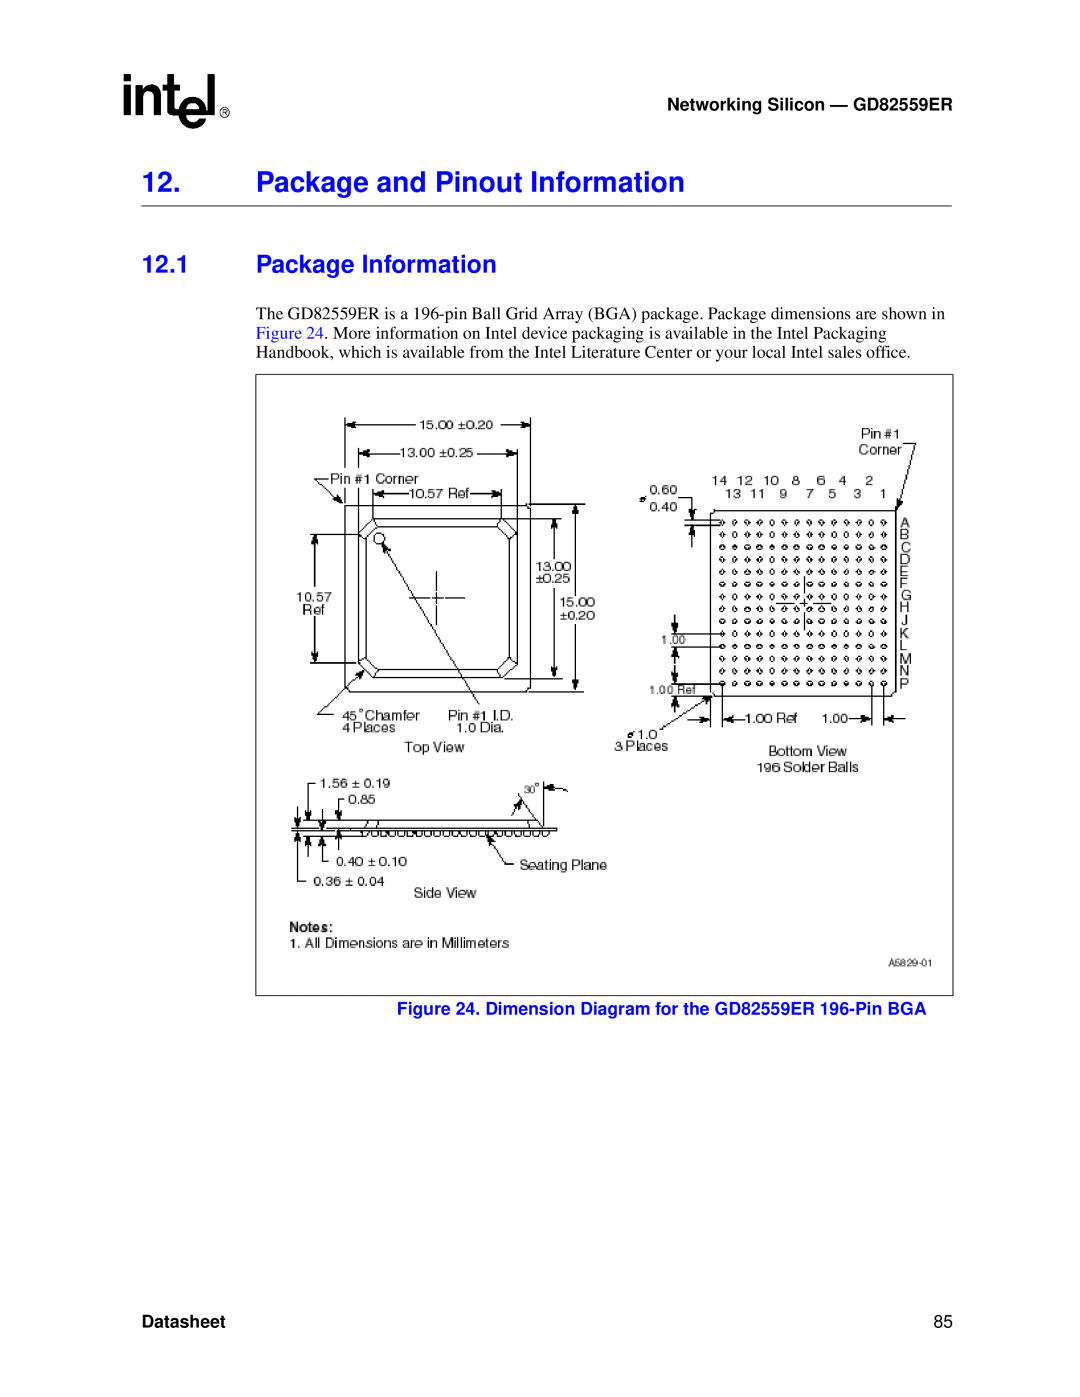 Intel Package and Pinout Information, Package Information, Dimension Diagram for the GD82559ER 196-Pin BGA, Datasheet 